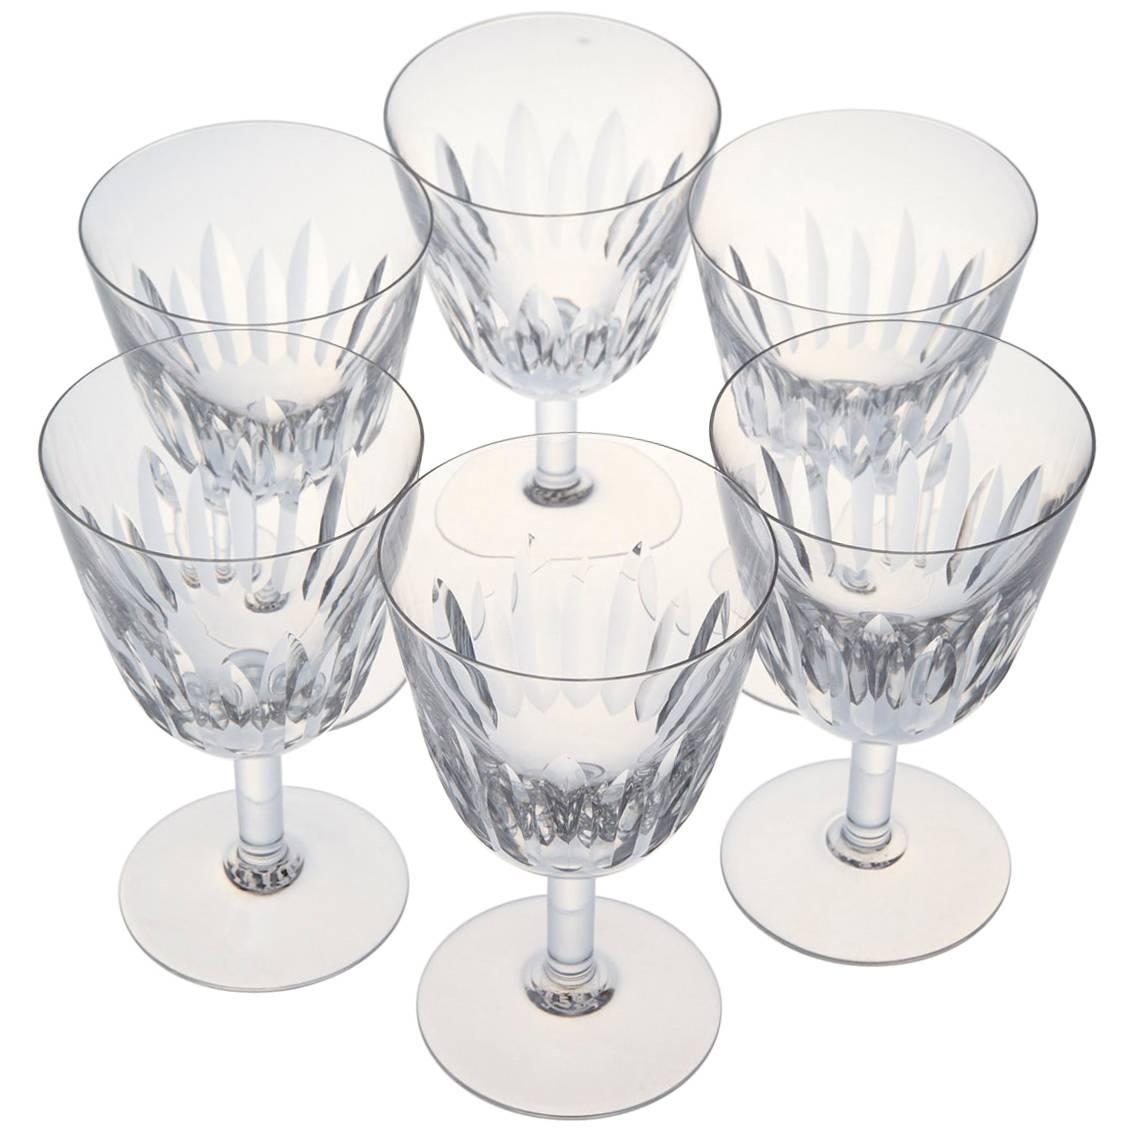 Set of Six Baccarat Crystal 'Lorraine' Pattern Red Wine Glasses, circa 1950s For Sale